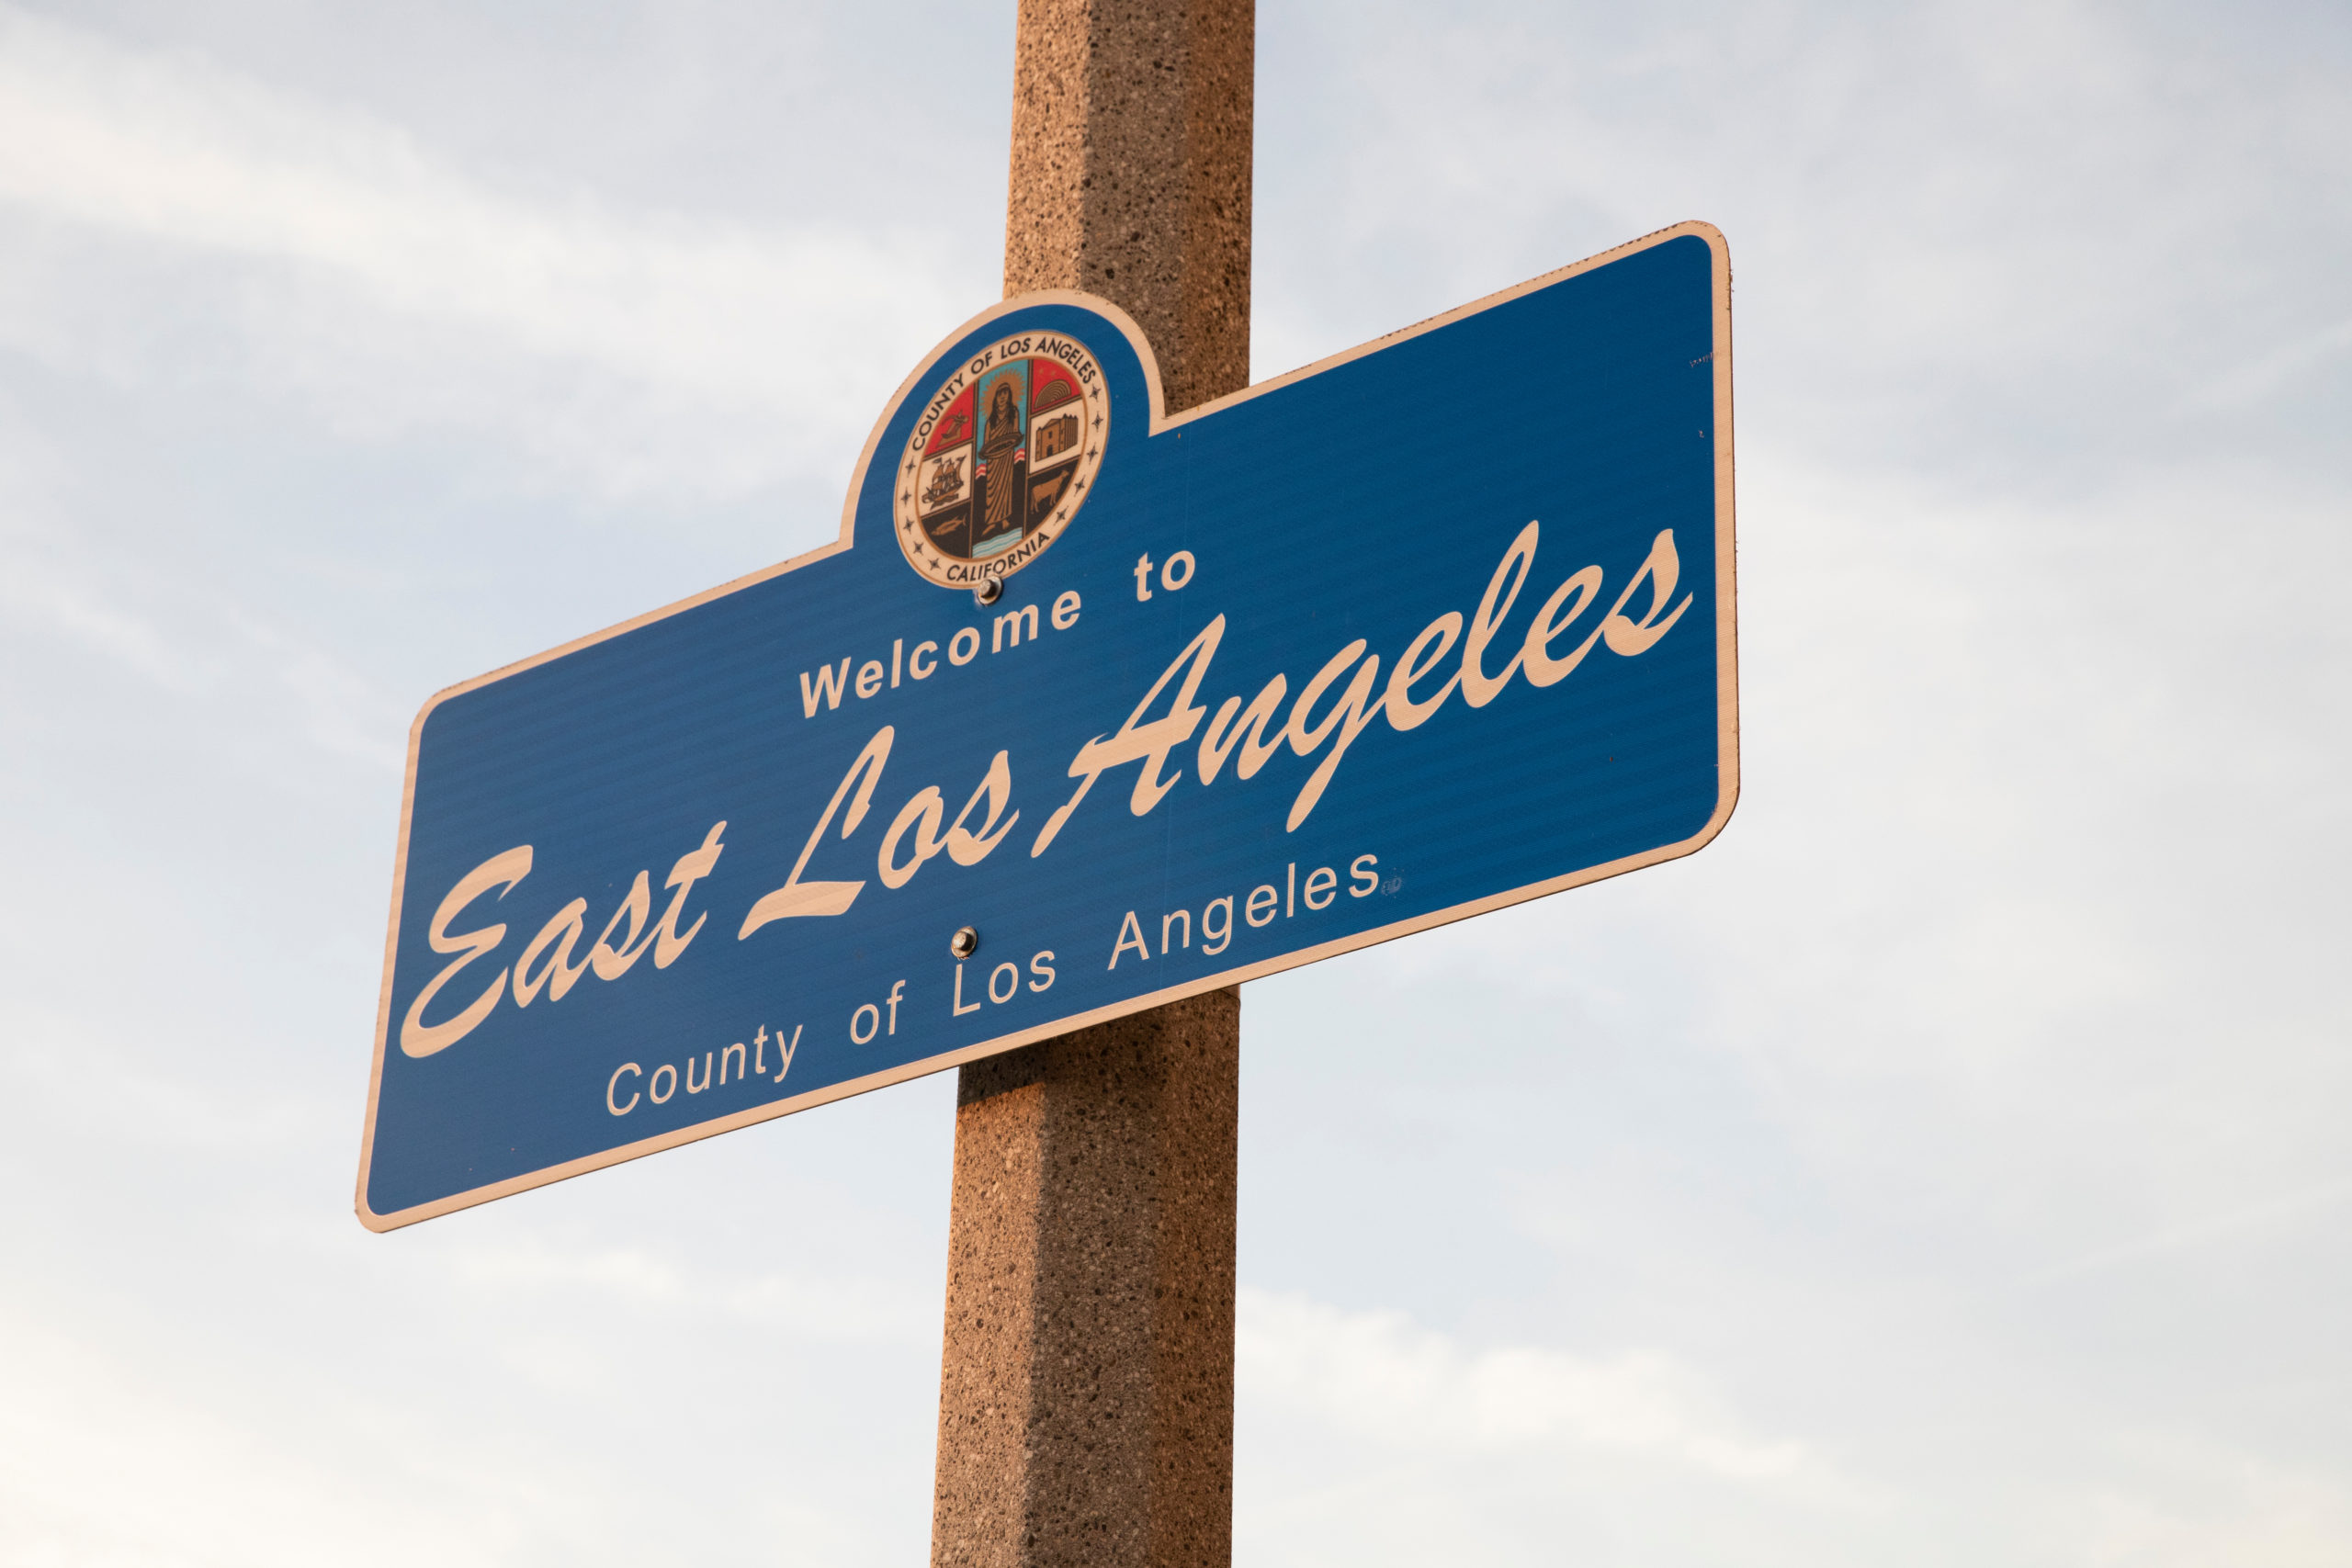 Street sign reading: 'Welcome to East Los Angeles'